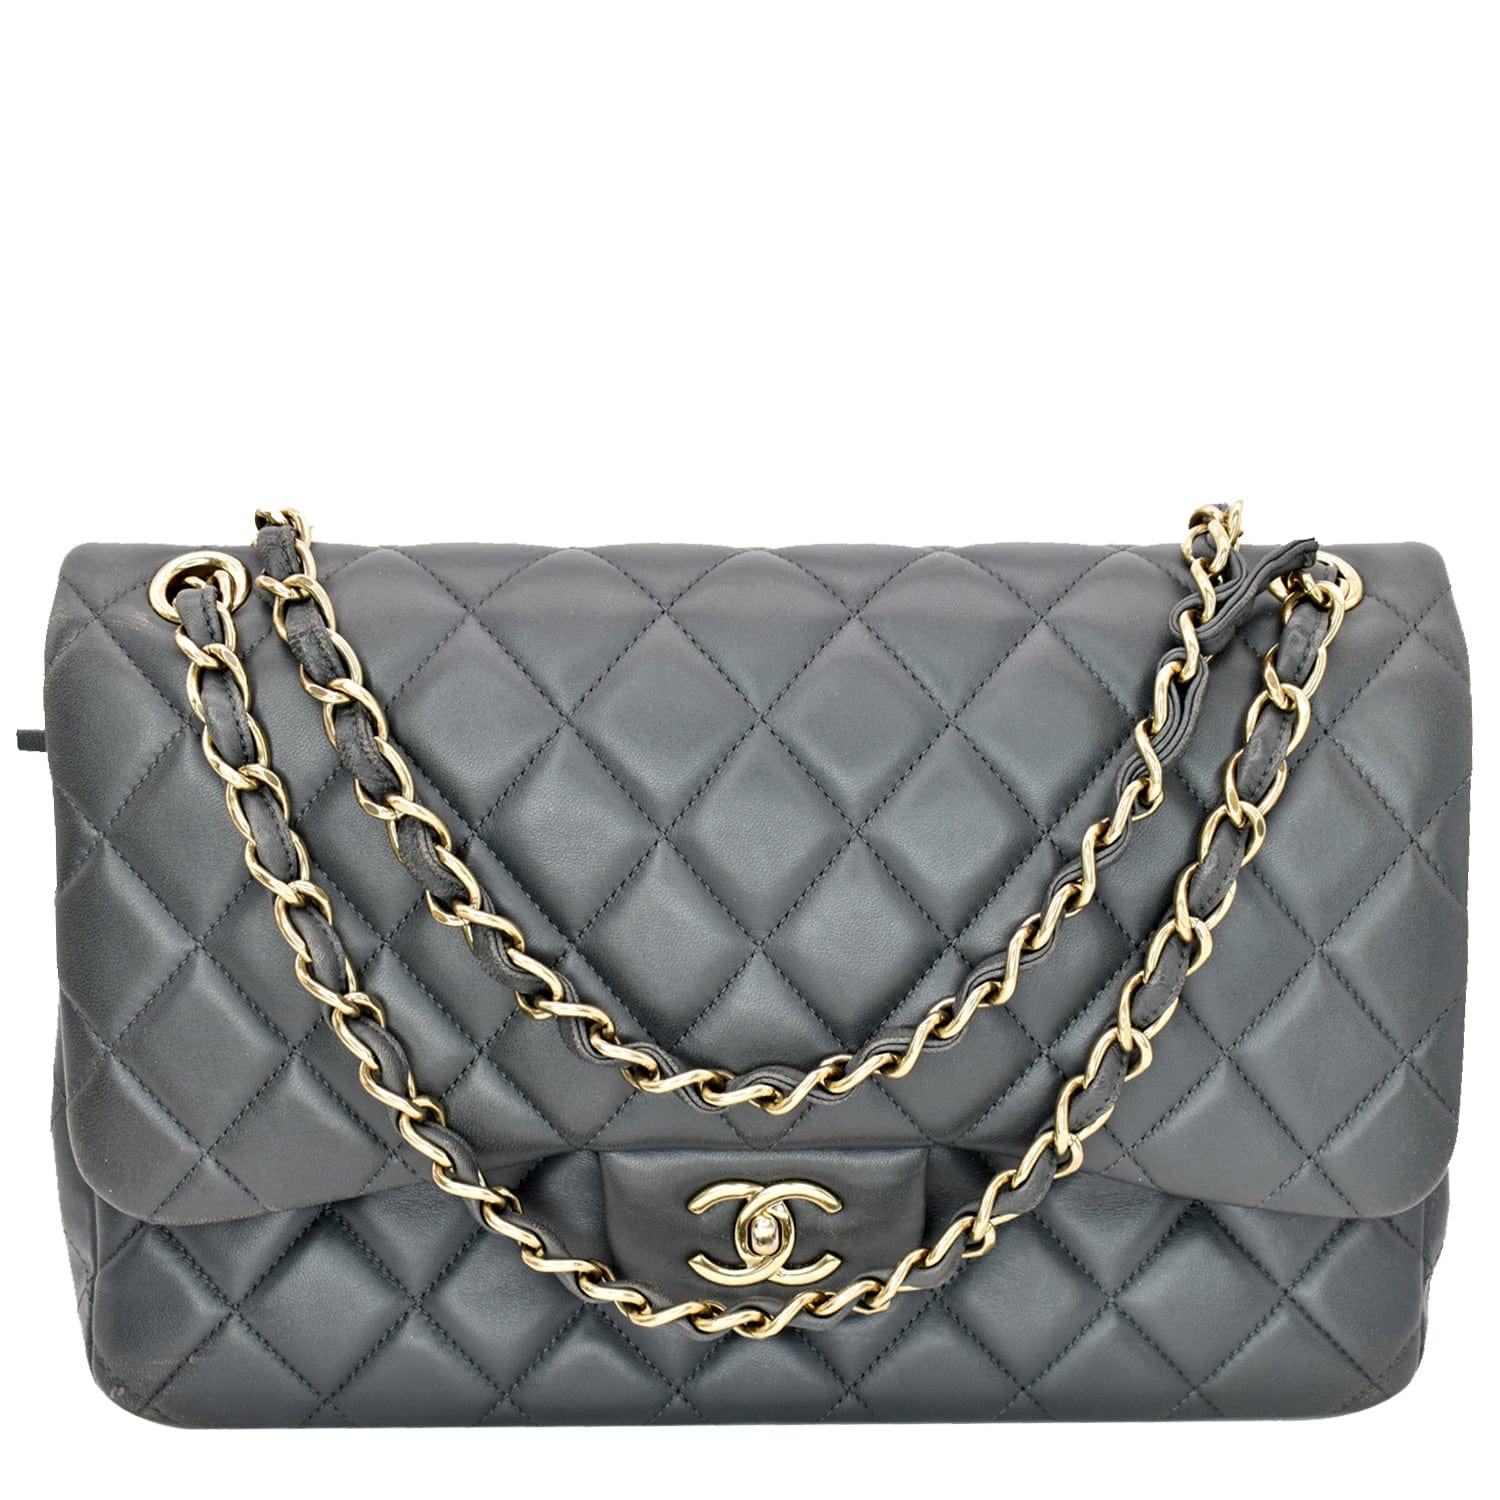 Chanel Silver Metallic Quilted Lambskin Jumbo Classic Double Flap